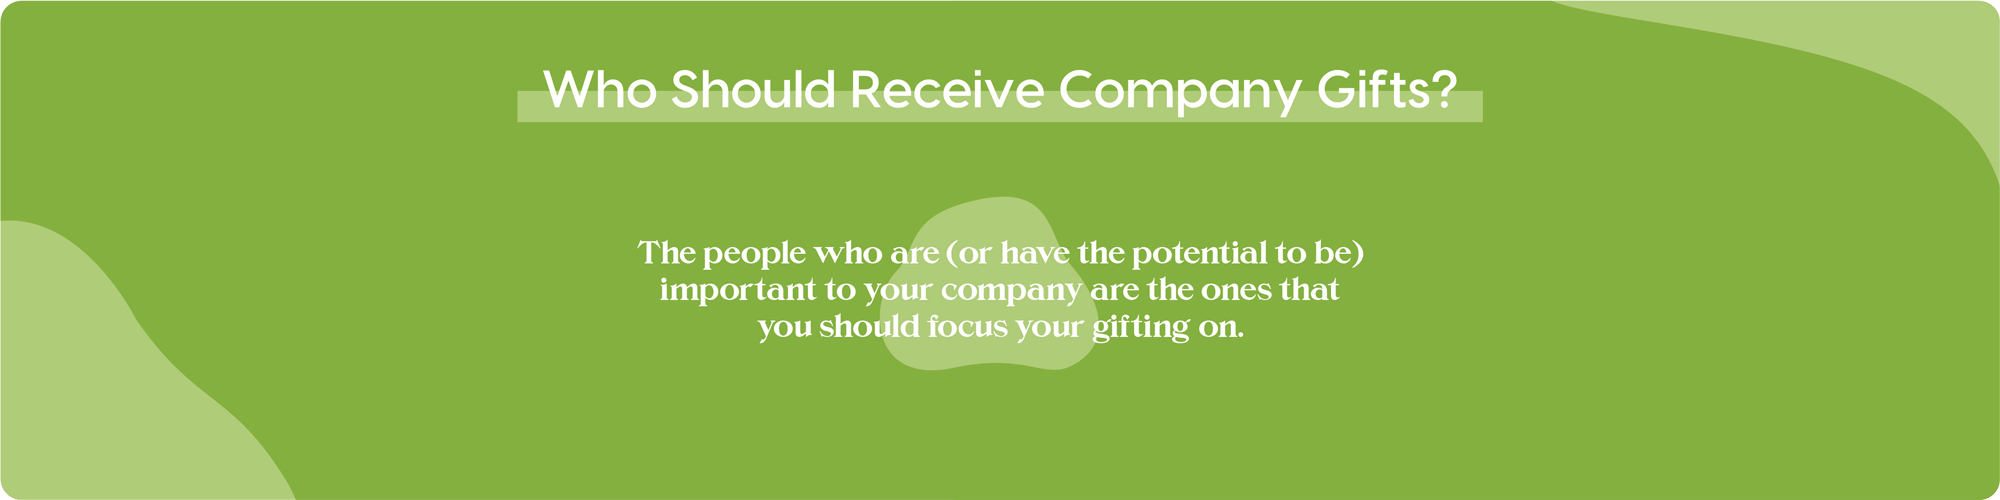 Who Should Receive Company Gifts? graphic - lime green background, over which the text "The people who are (or have the potential to be) important to your company are the ones that you should focus your gifting on.